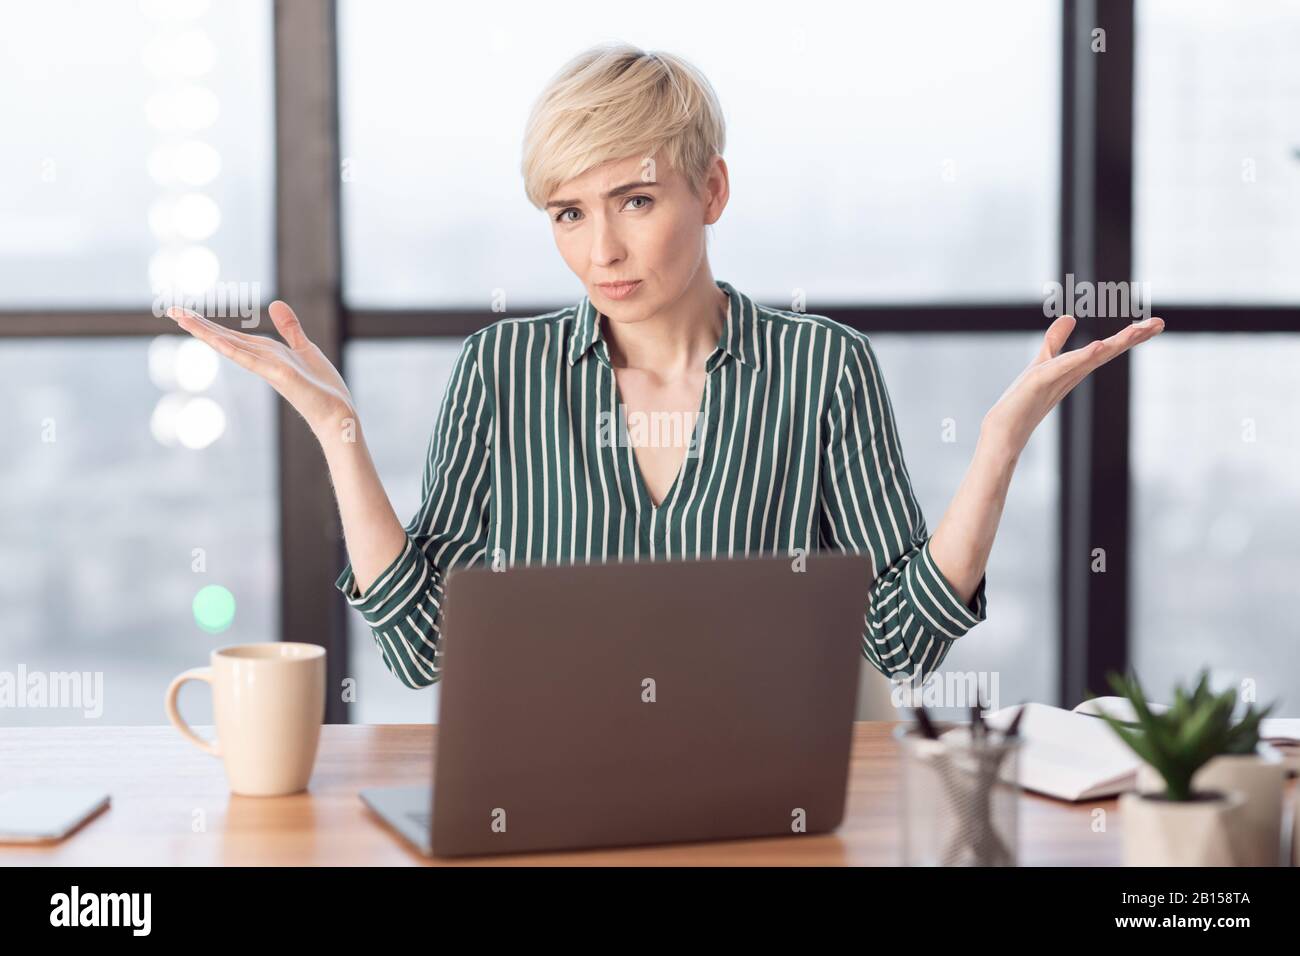 Puzzled Lady Shrugging Shoulders Gesturing With Hands Sitting In Office Stock Photo